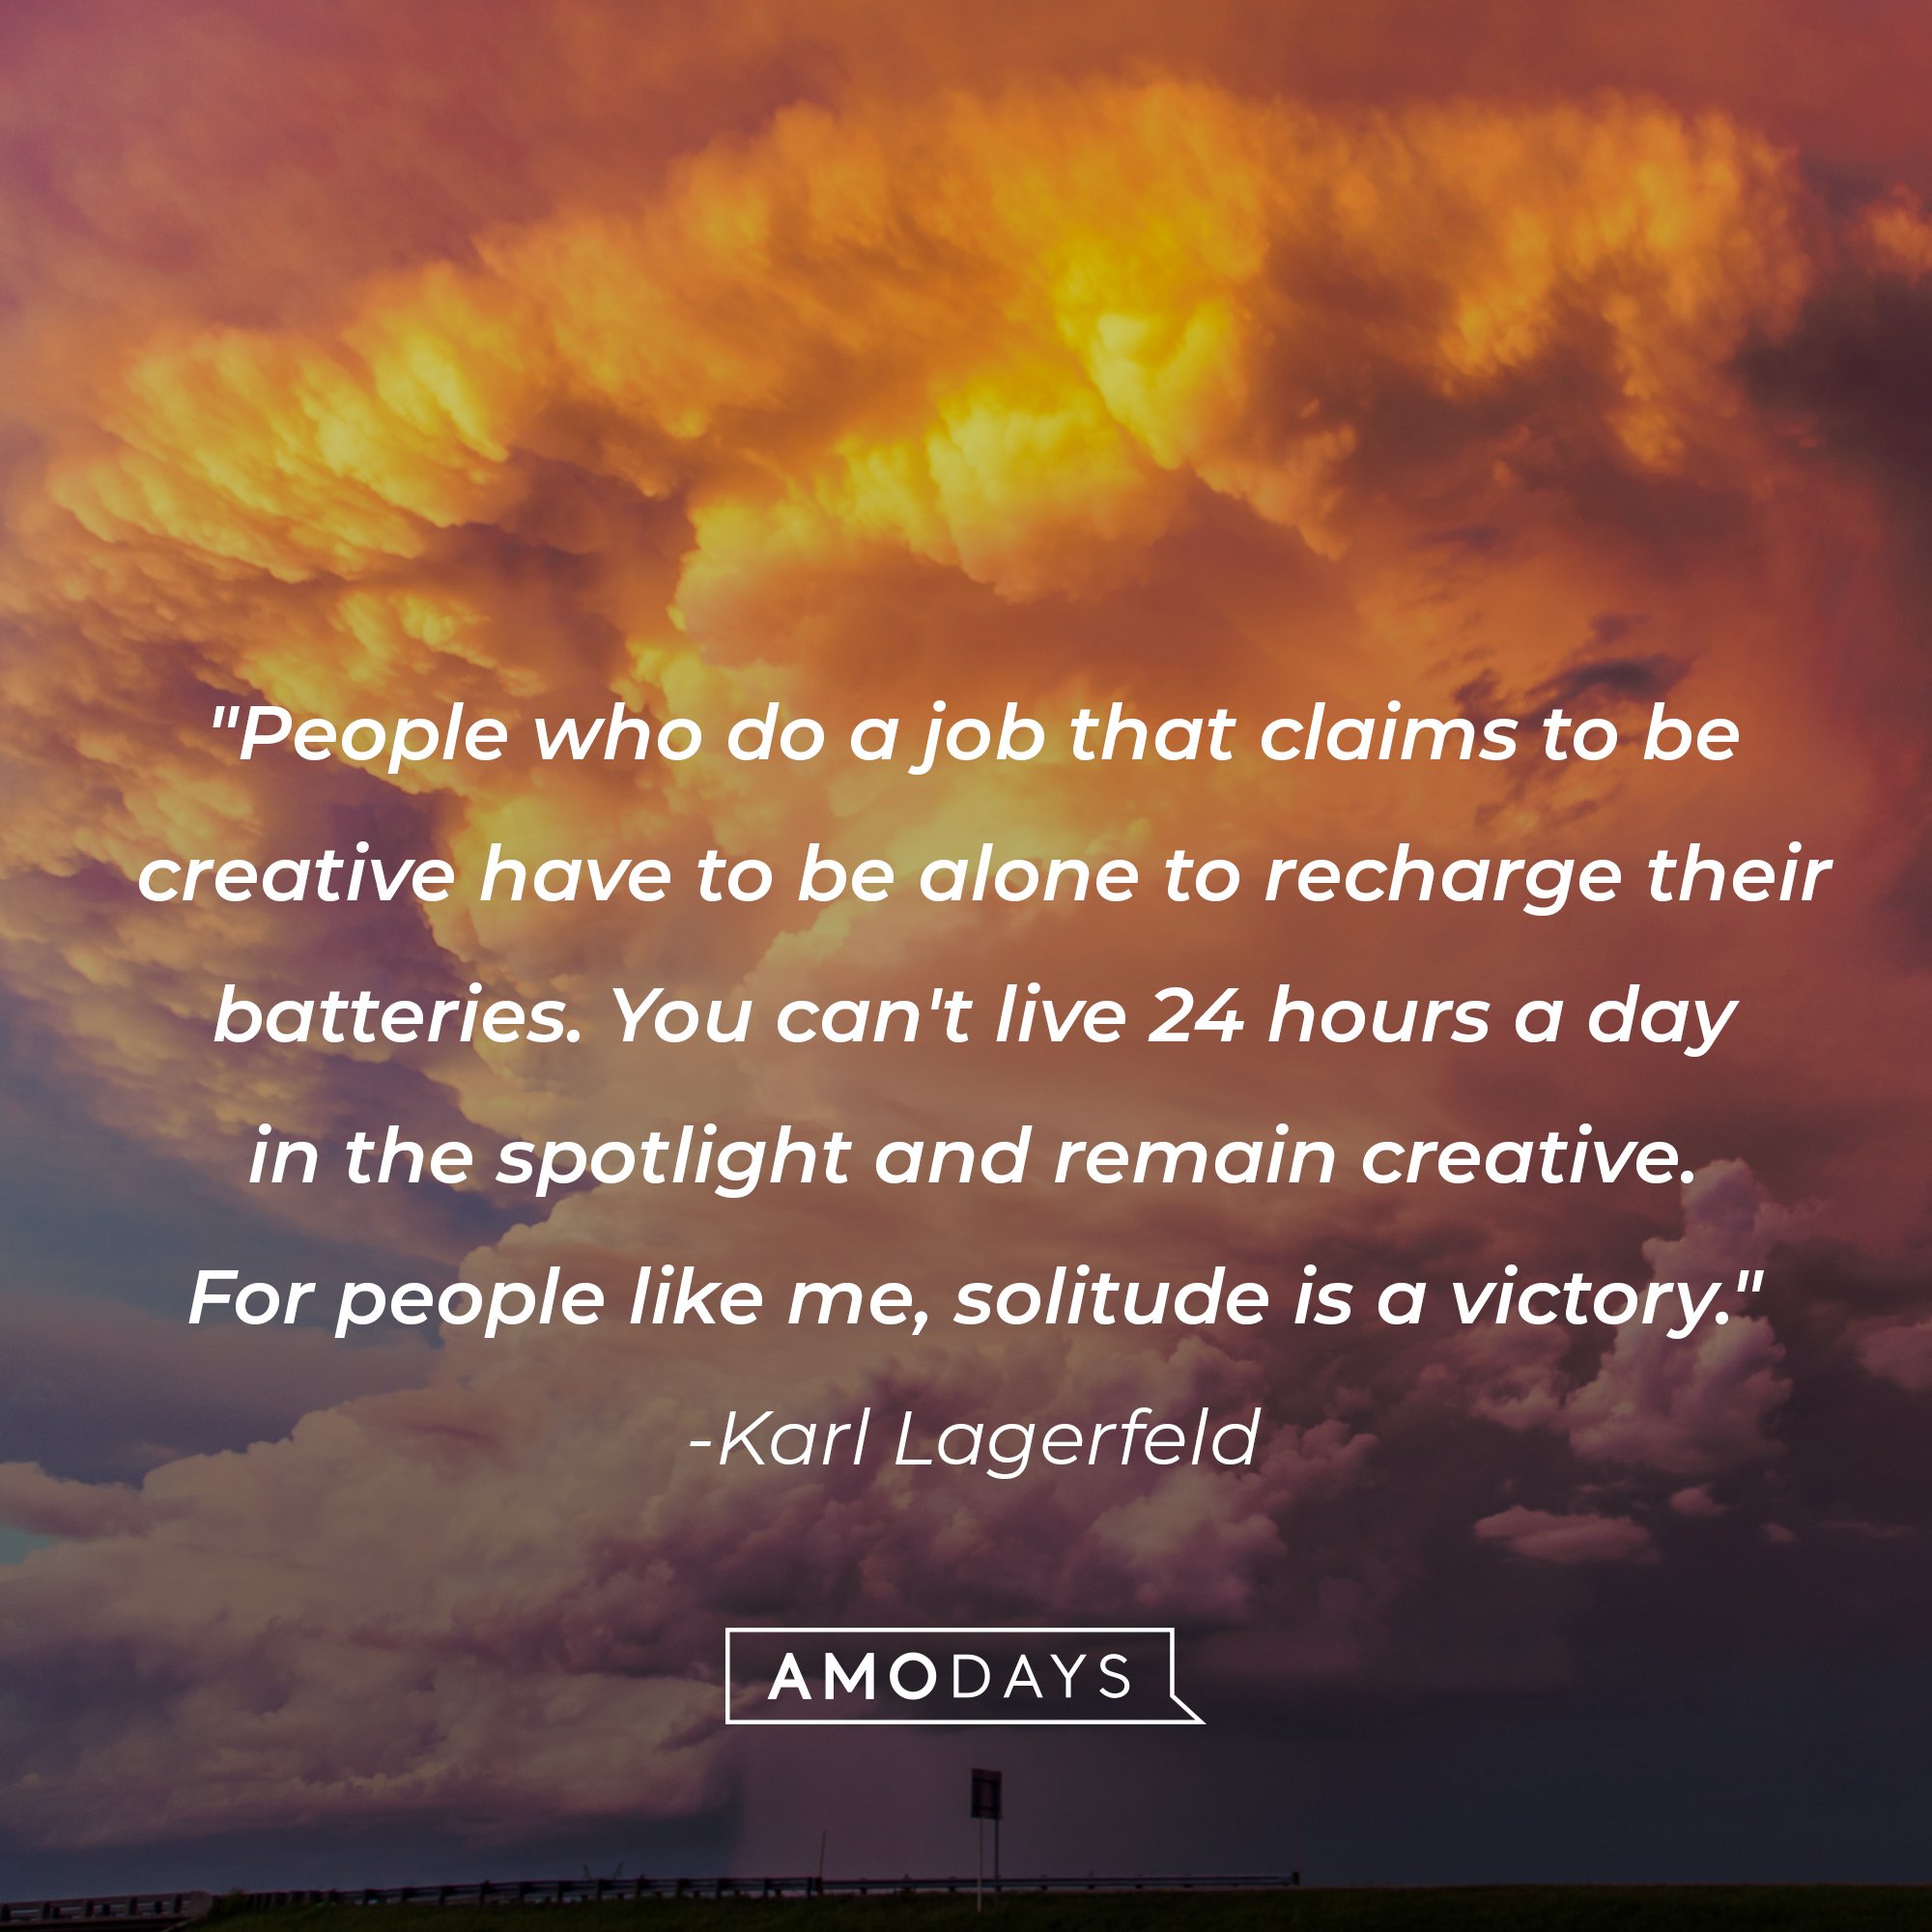 Karl Lagerfeld‘s quote: "People who do a job that claims to be creative have to be alone to recharge their batteries. You can't live 24 hours a day in the spotlight and remain creative. For people like me, solitude is a victory." | Image: AmoDays  